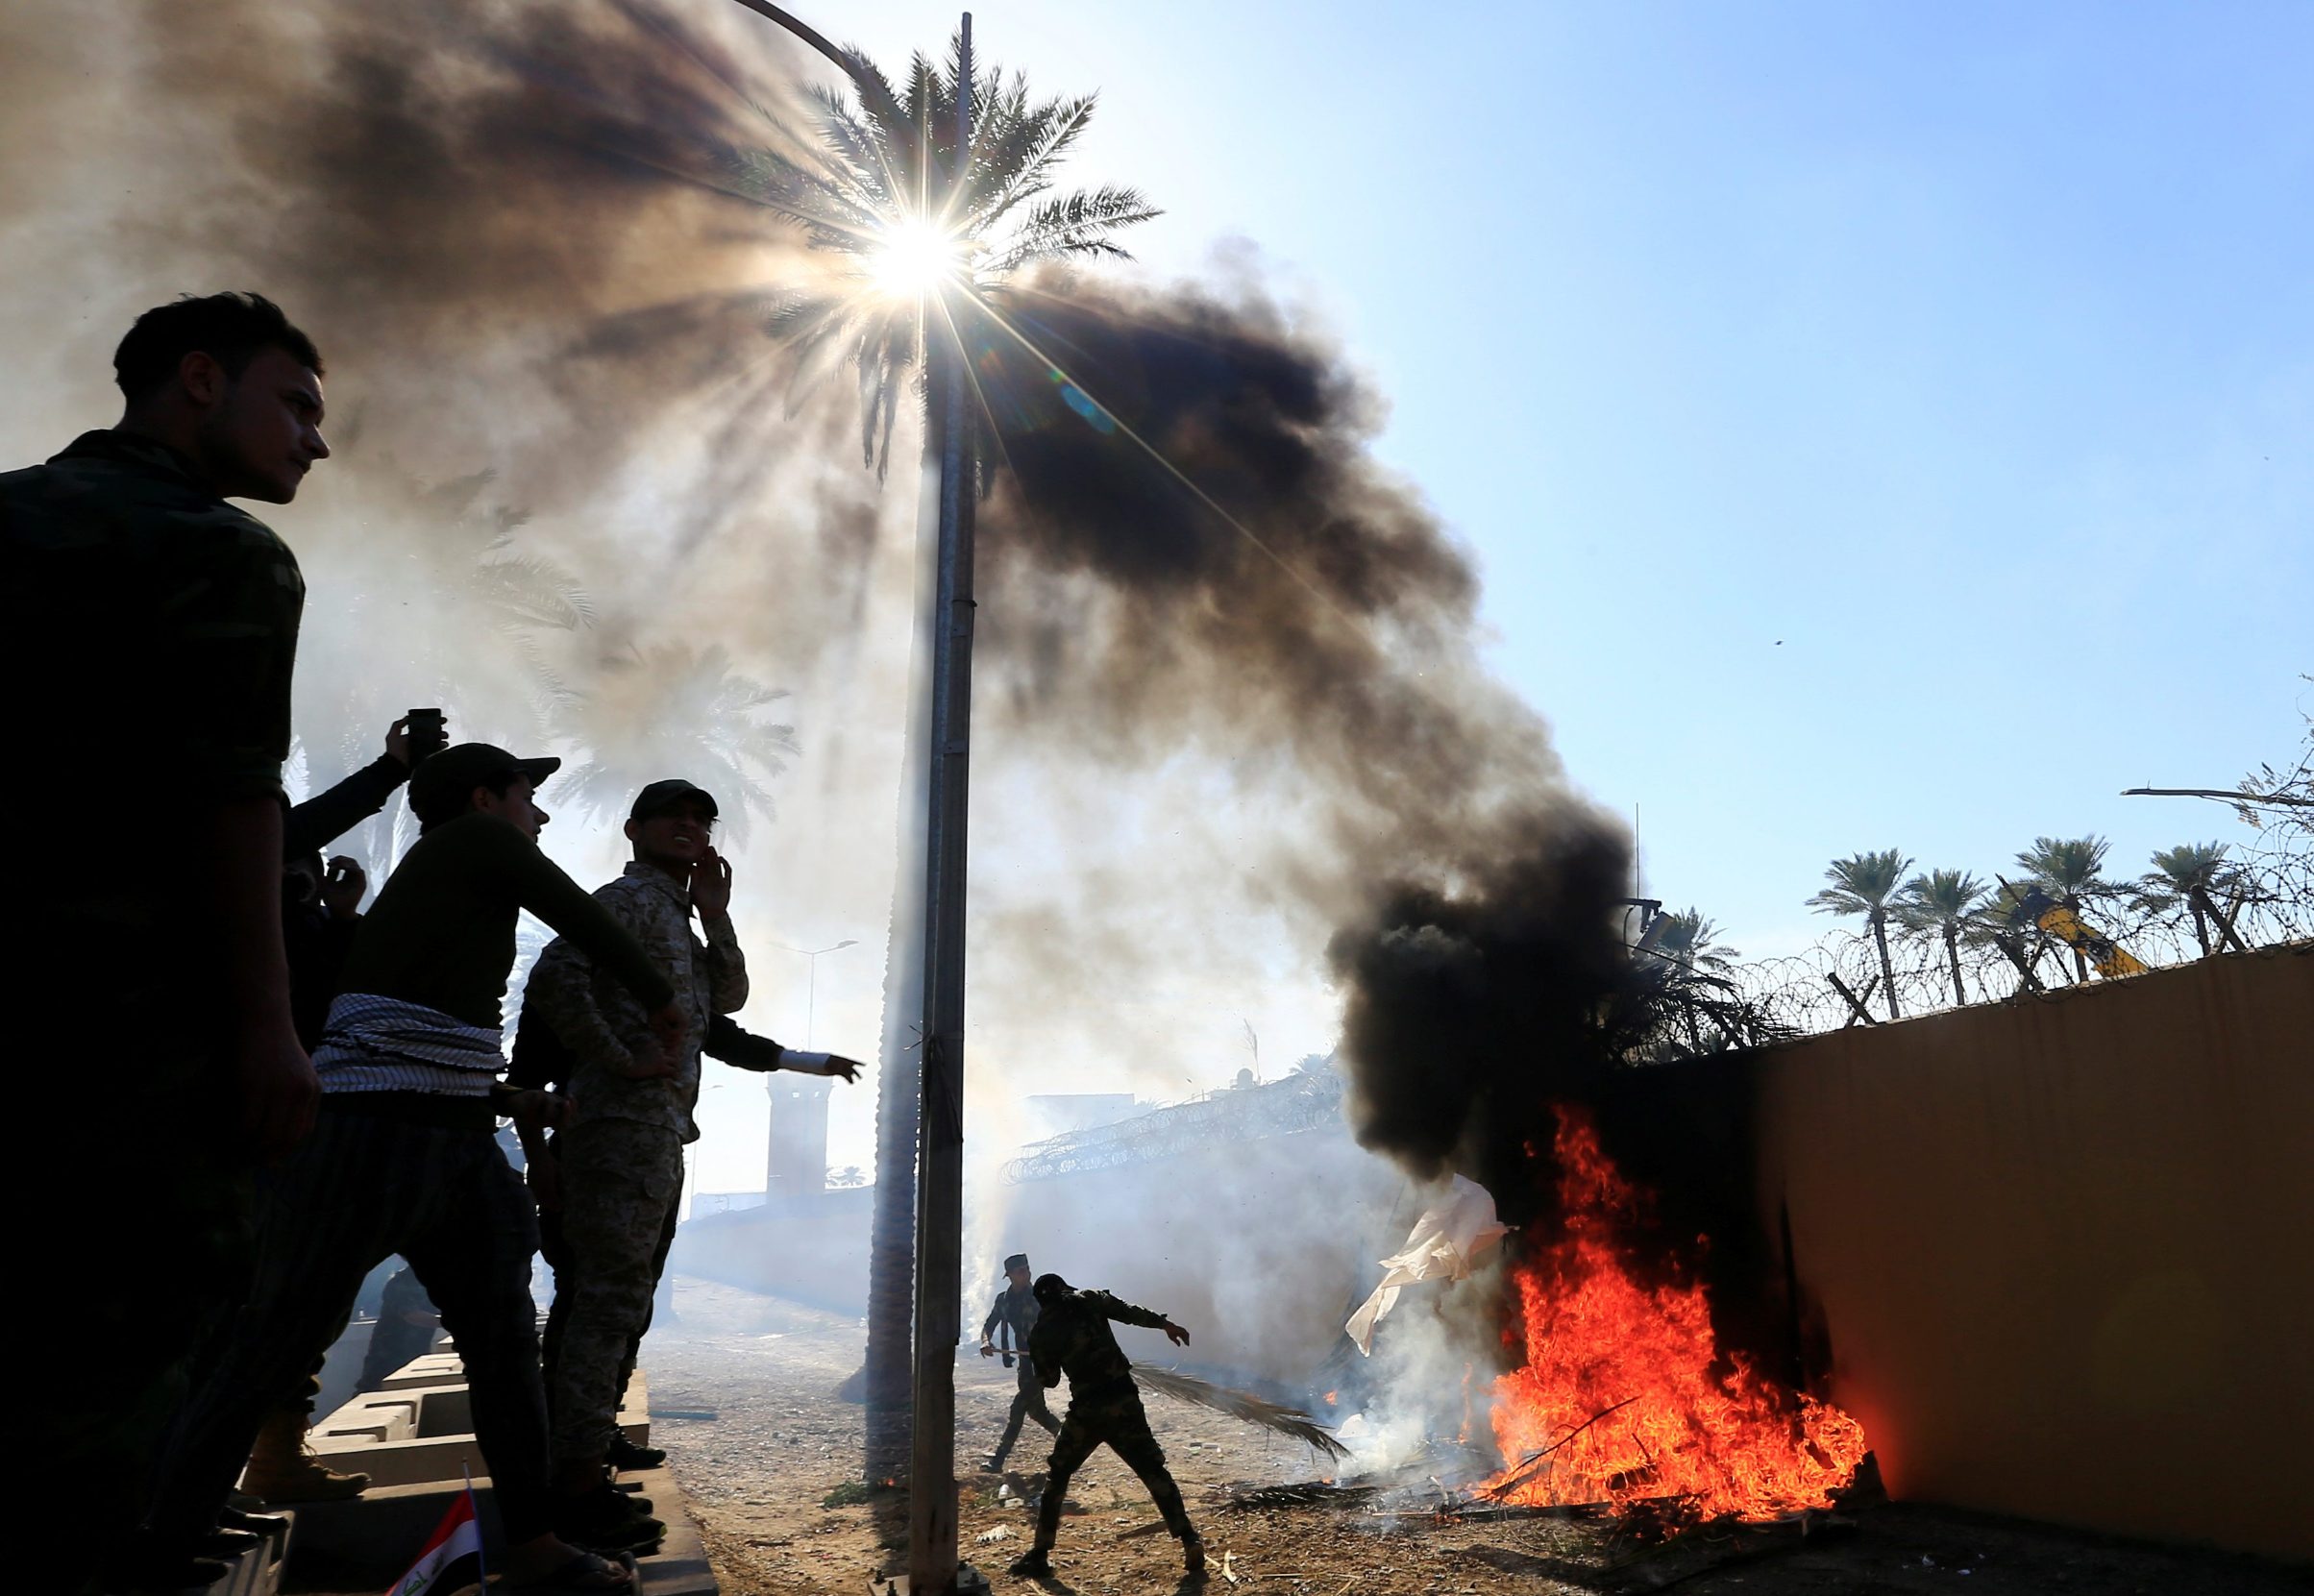 Hashd al-Shaabi (paramilitary forces) fighters set fire on the U.S. Embassy wall to condemn air strikes on their bases, in Baghdad, Iraq December 31, 2019. REUTERS/Thaier al-Sudani